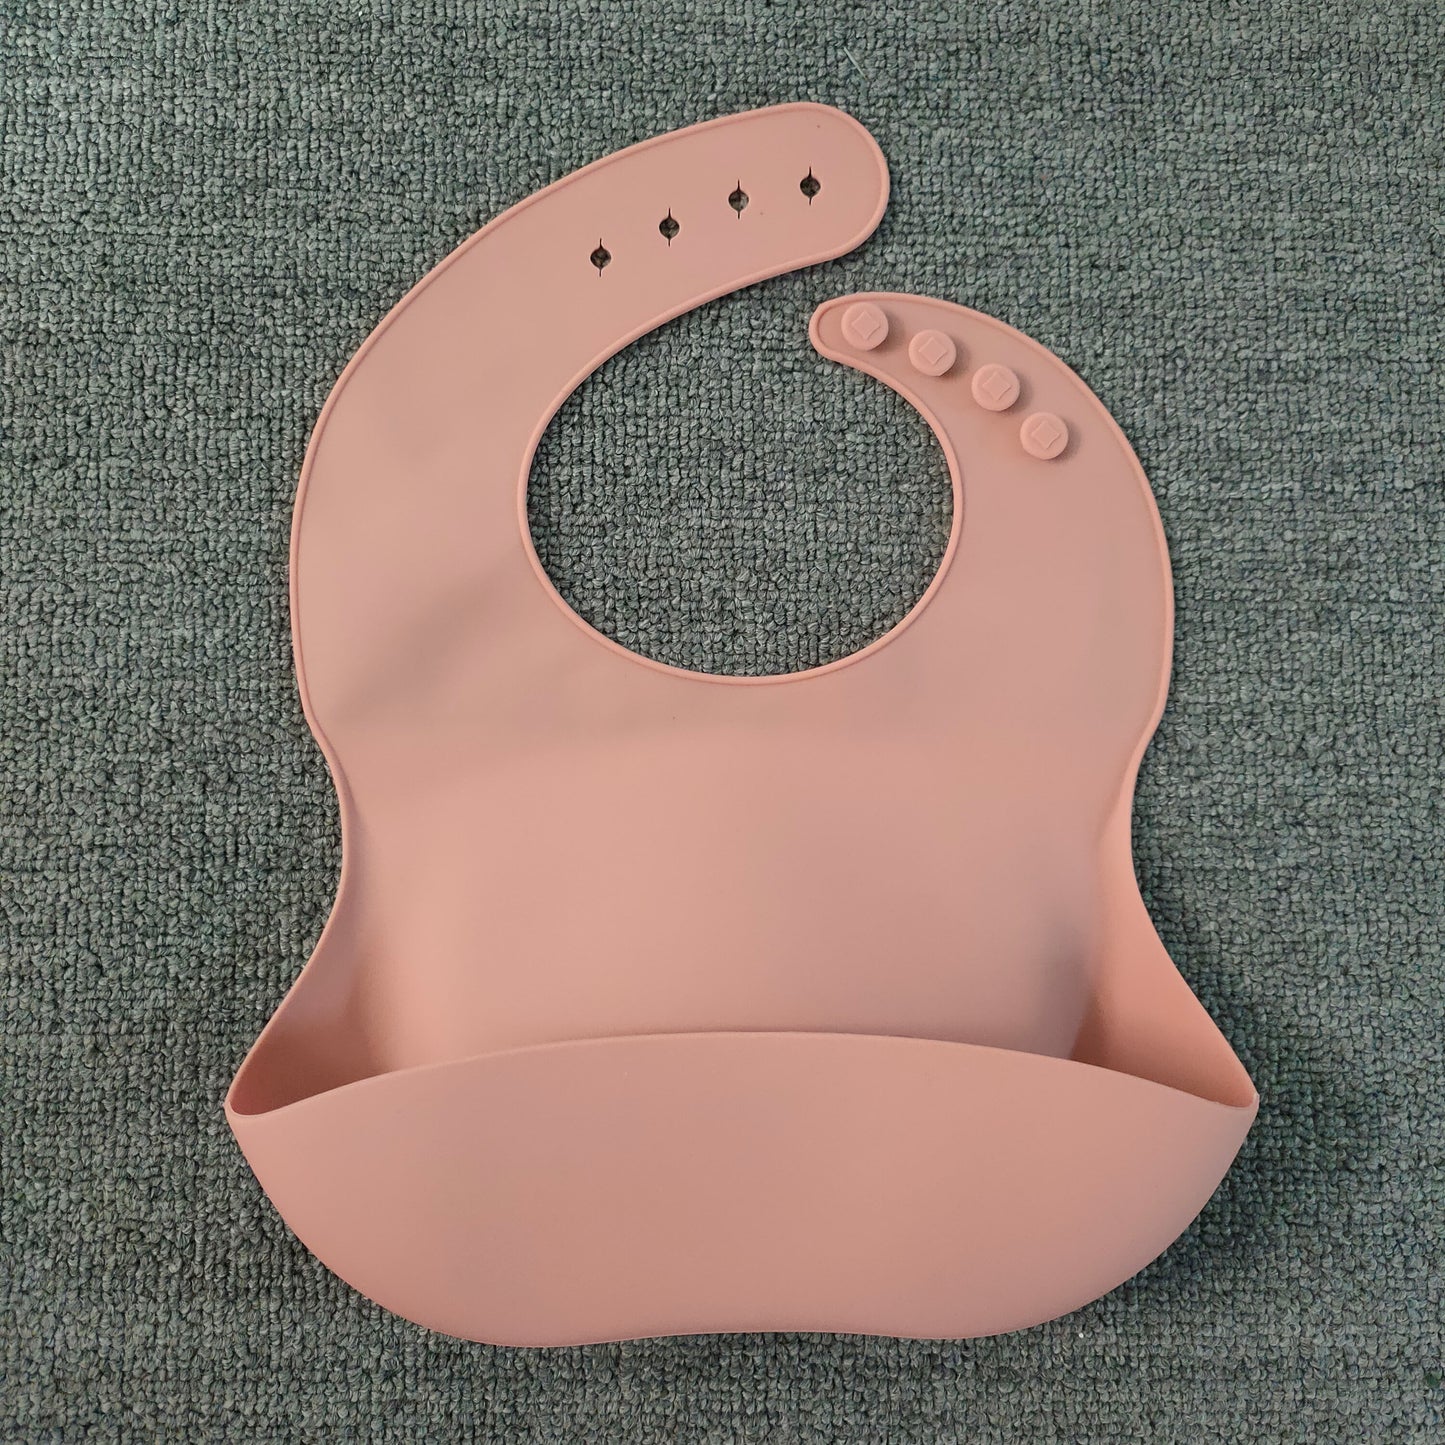 Soft Waterproof Silicone Baby Bibs with Food Catcher